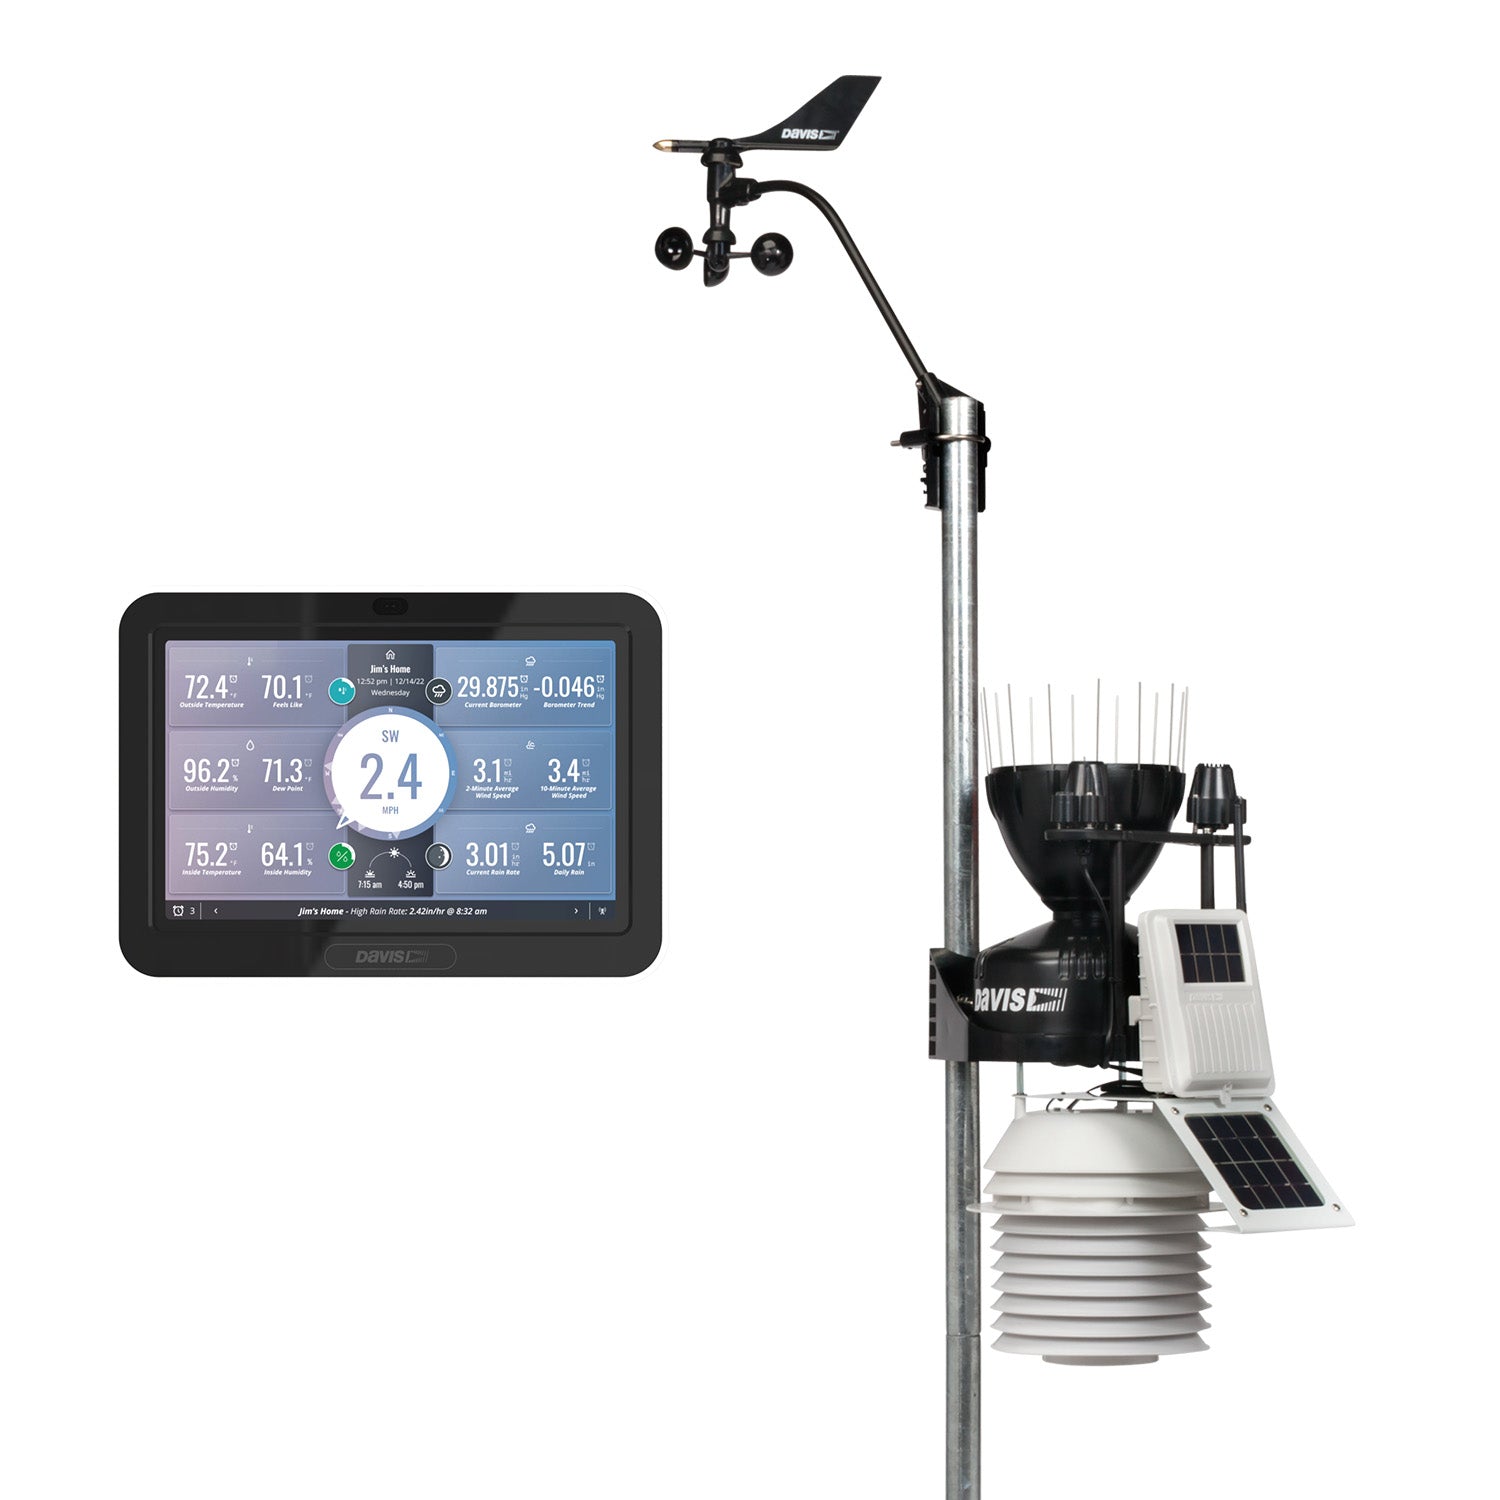 WS-002-2S Wireless Weather Forecast Station Indoor/Outdoor